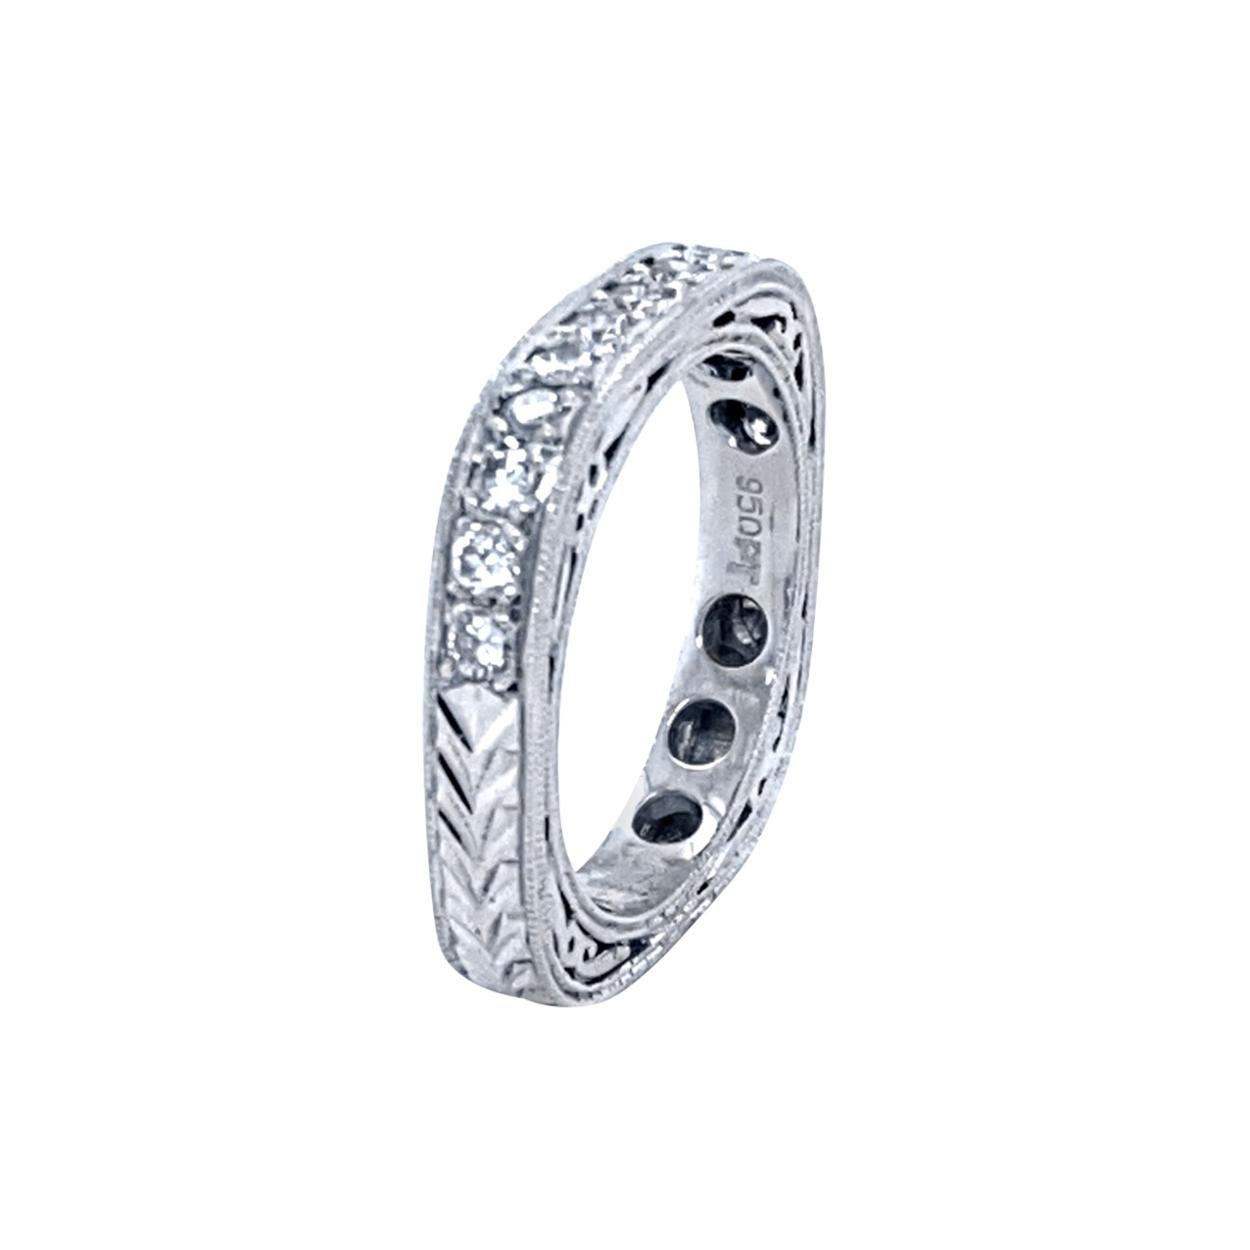 0.50 Carat Antique Style Platinum Pave Set Diamond Ring with Hand Engraving For Sale